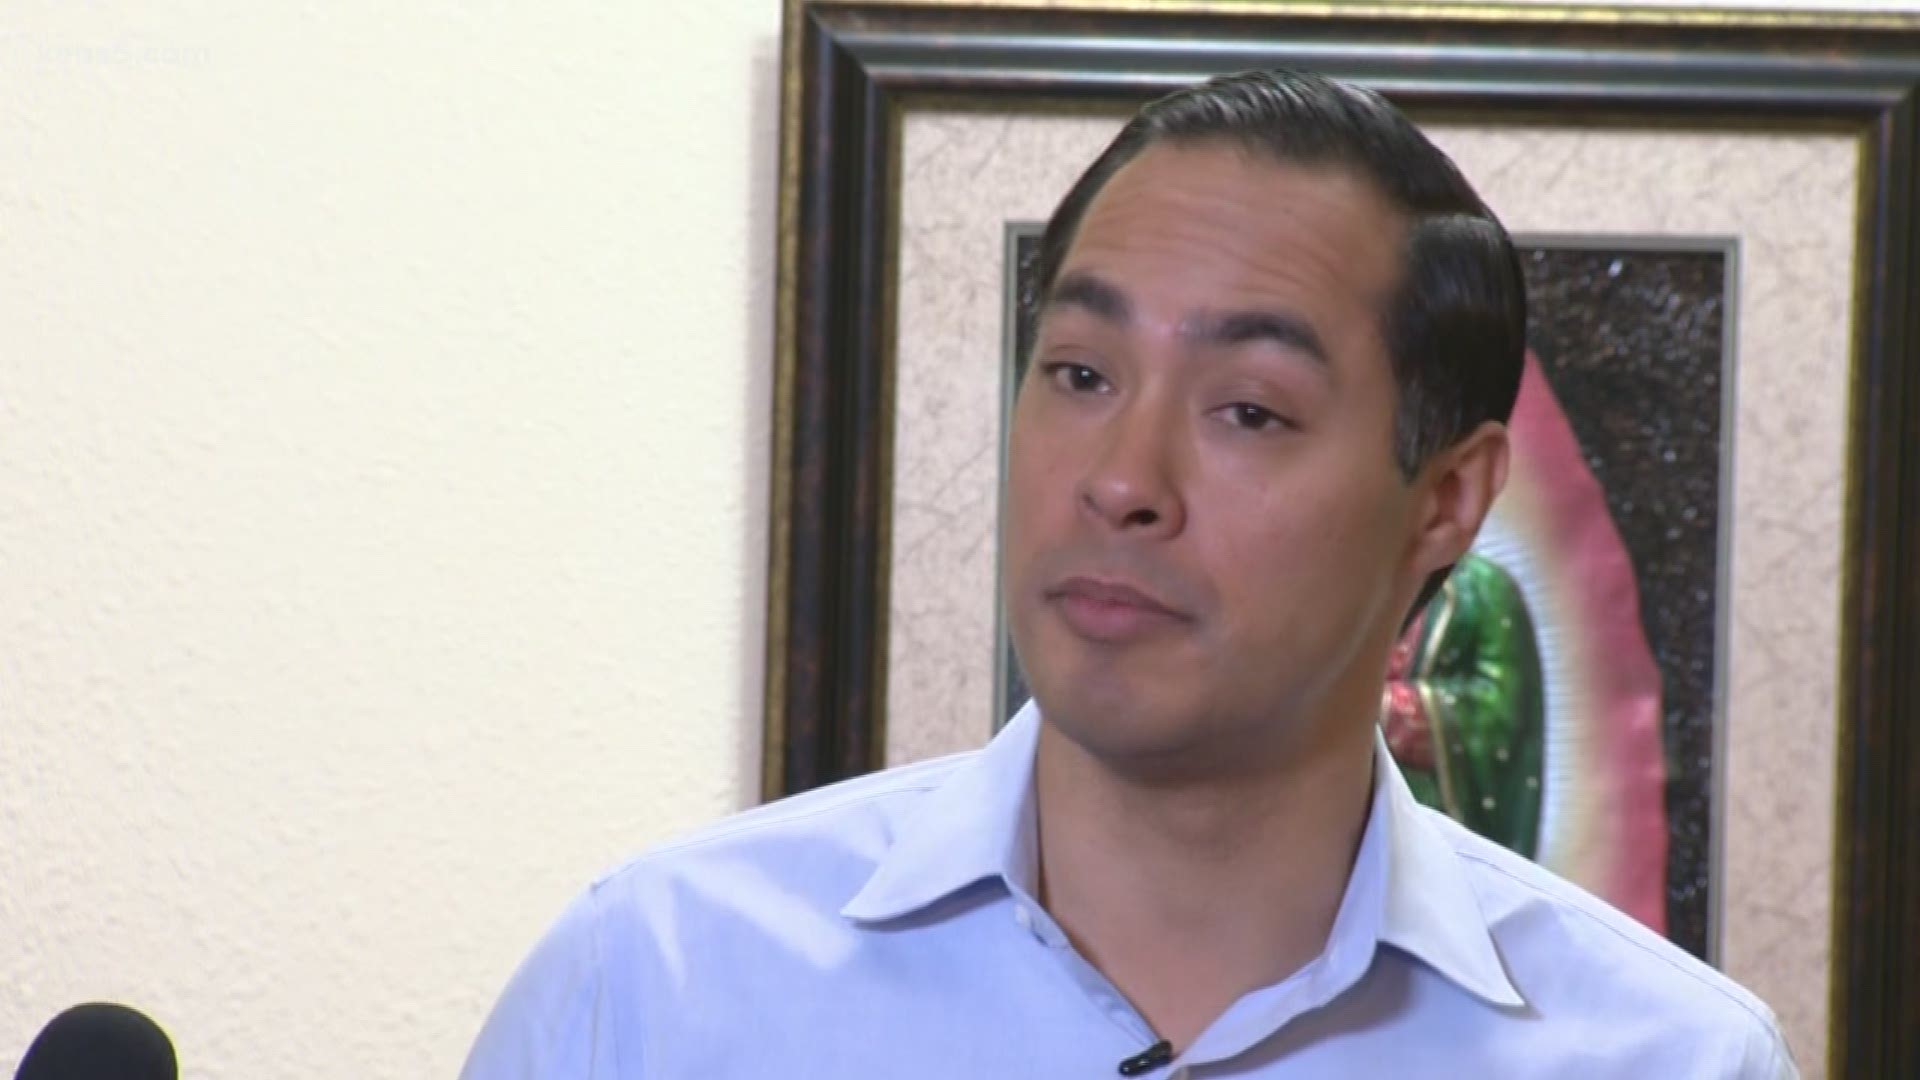 Julian Castro, a Democrat who served in former President Barack Obama's cabinet, announced Wednesday that he's exploring a run at the White House in 2020